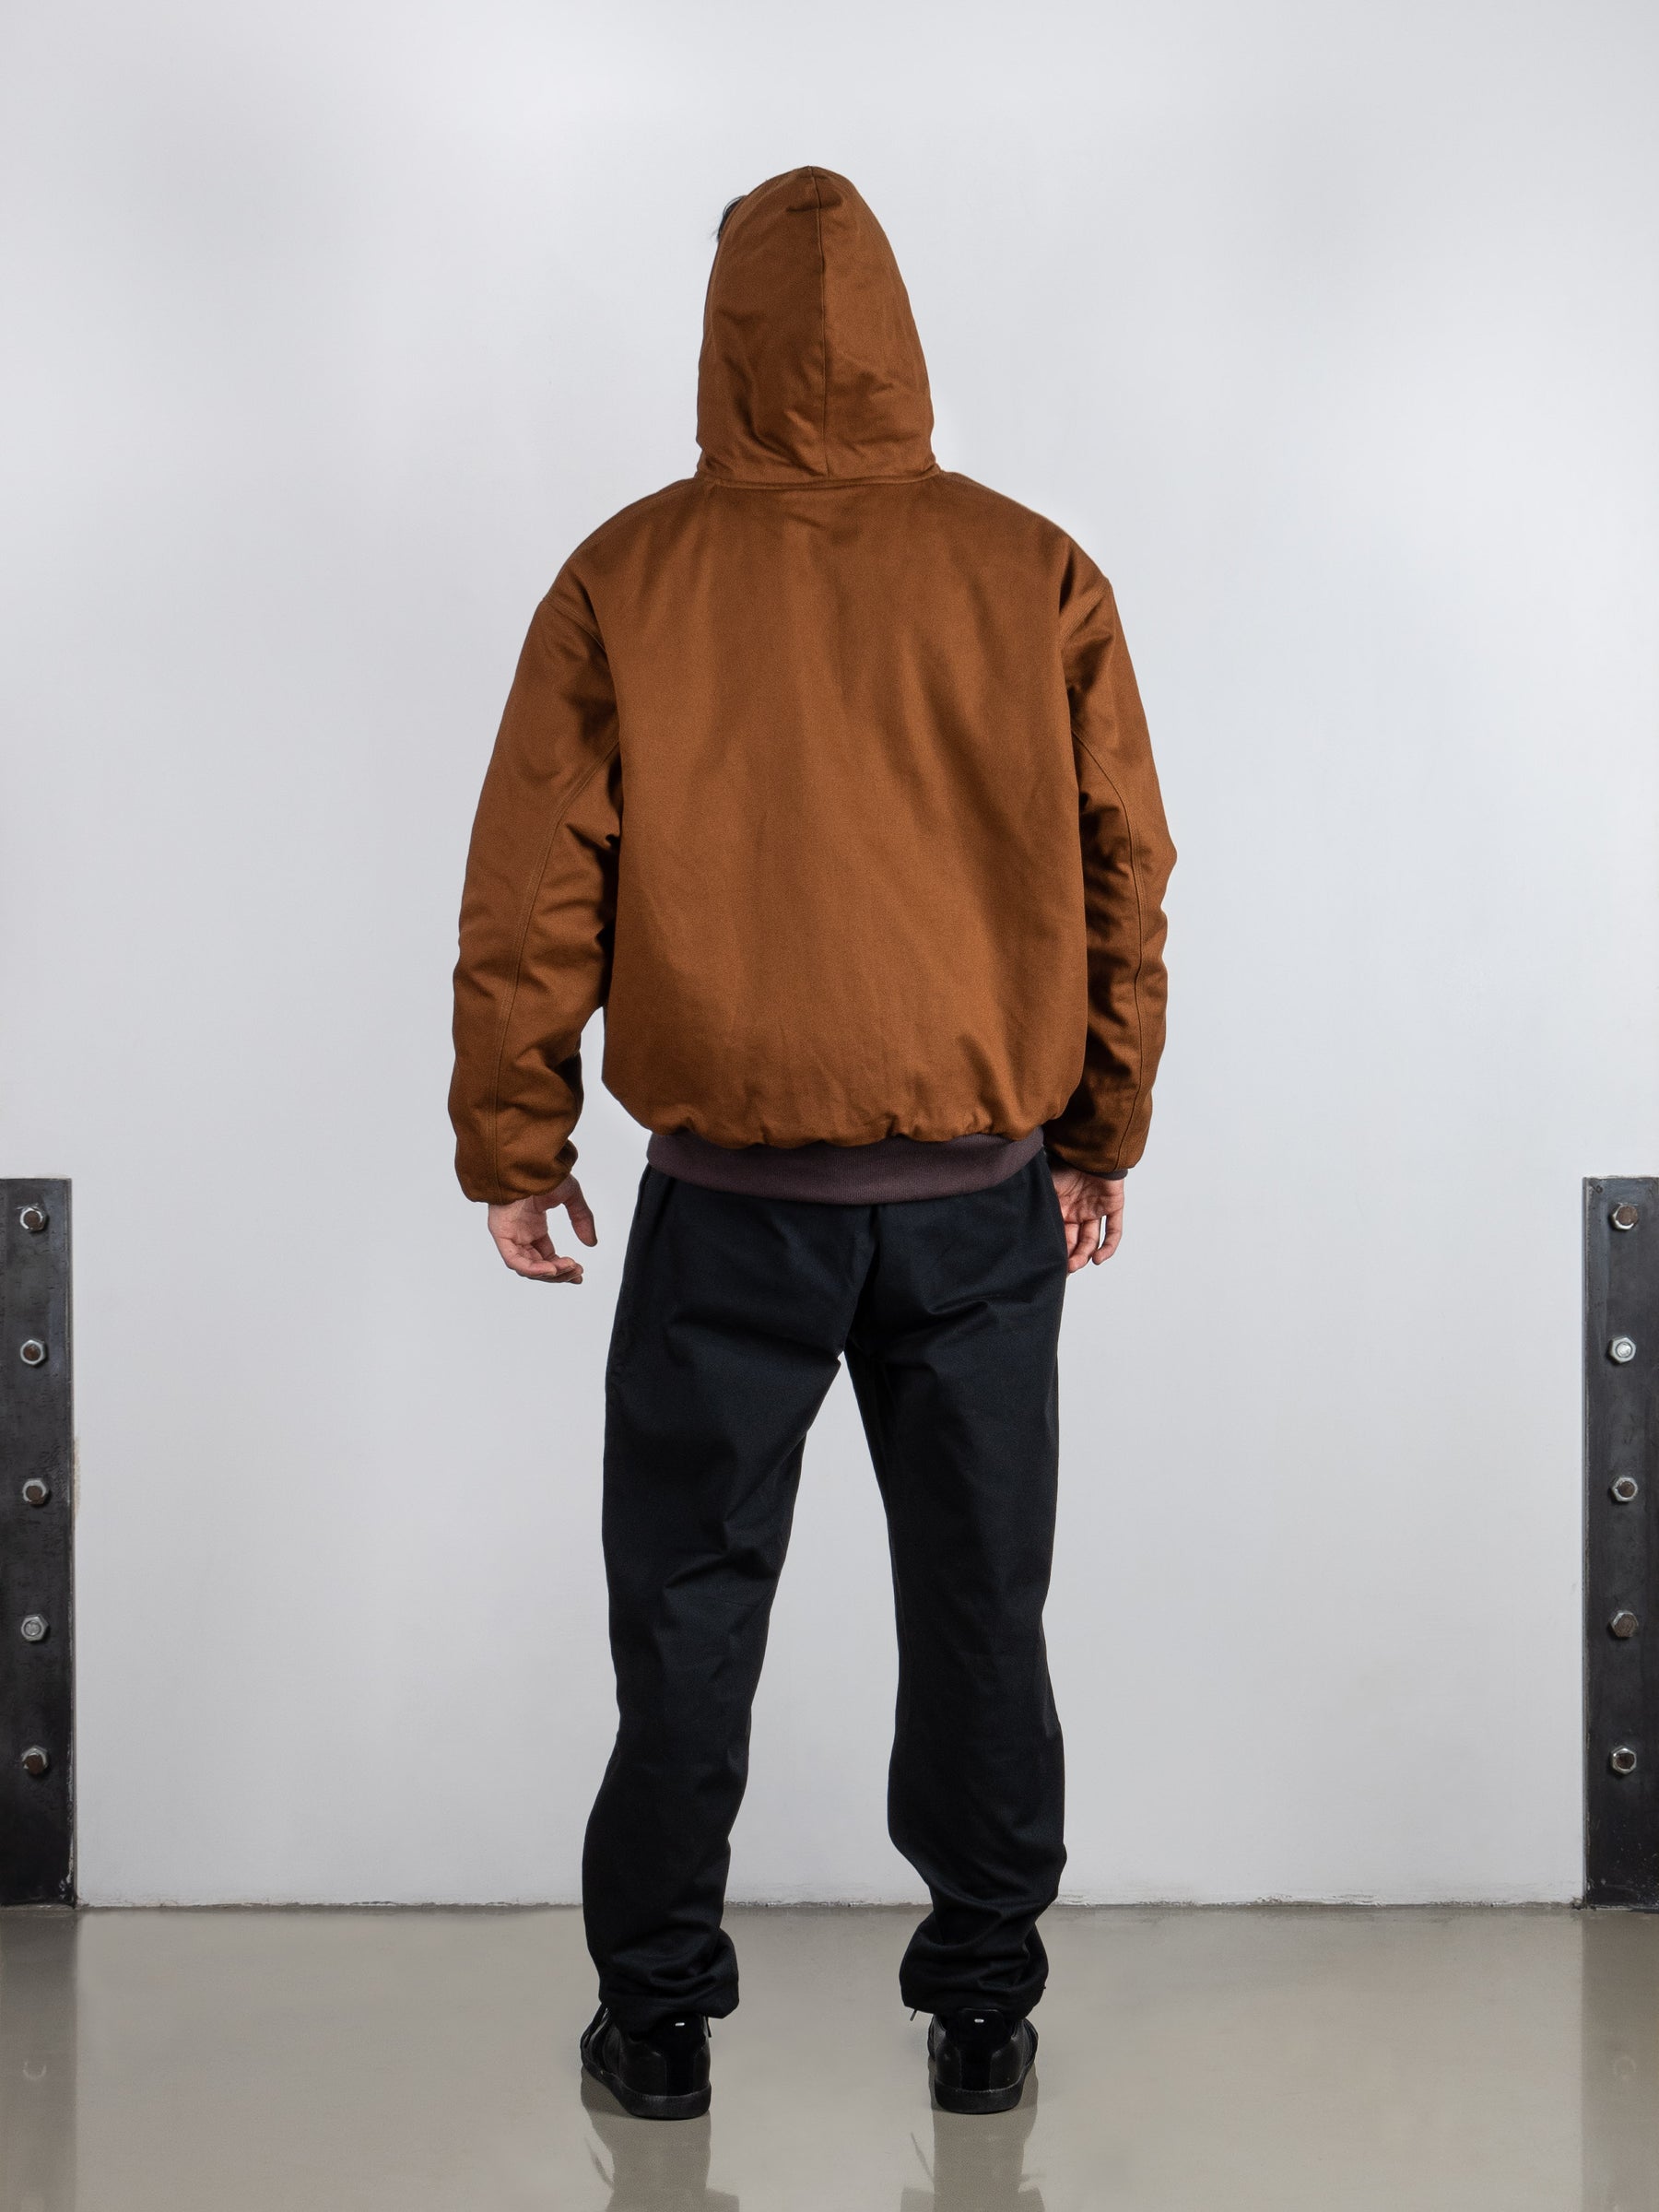 A man wearing a rust brown men's jacket by French Brand Crest. Rust Reversible Hooded Jacket with Italian padded cotton lining